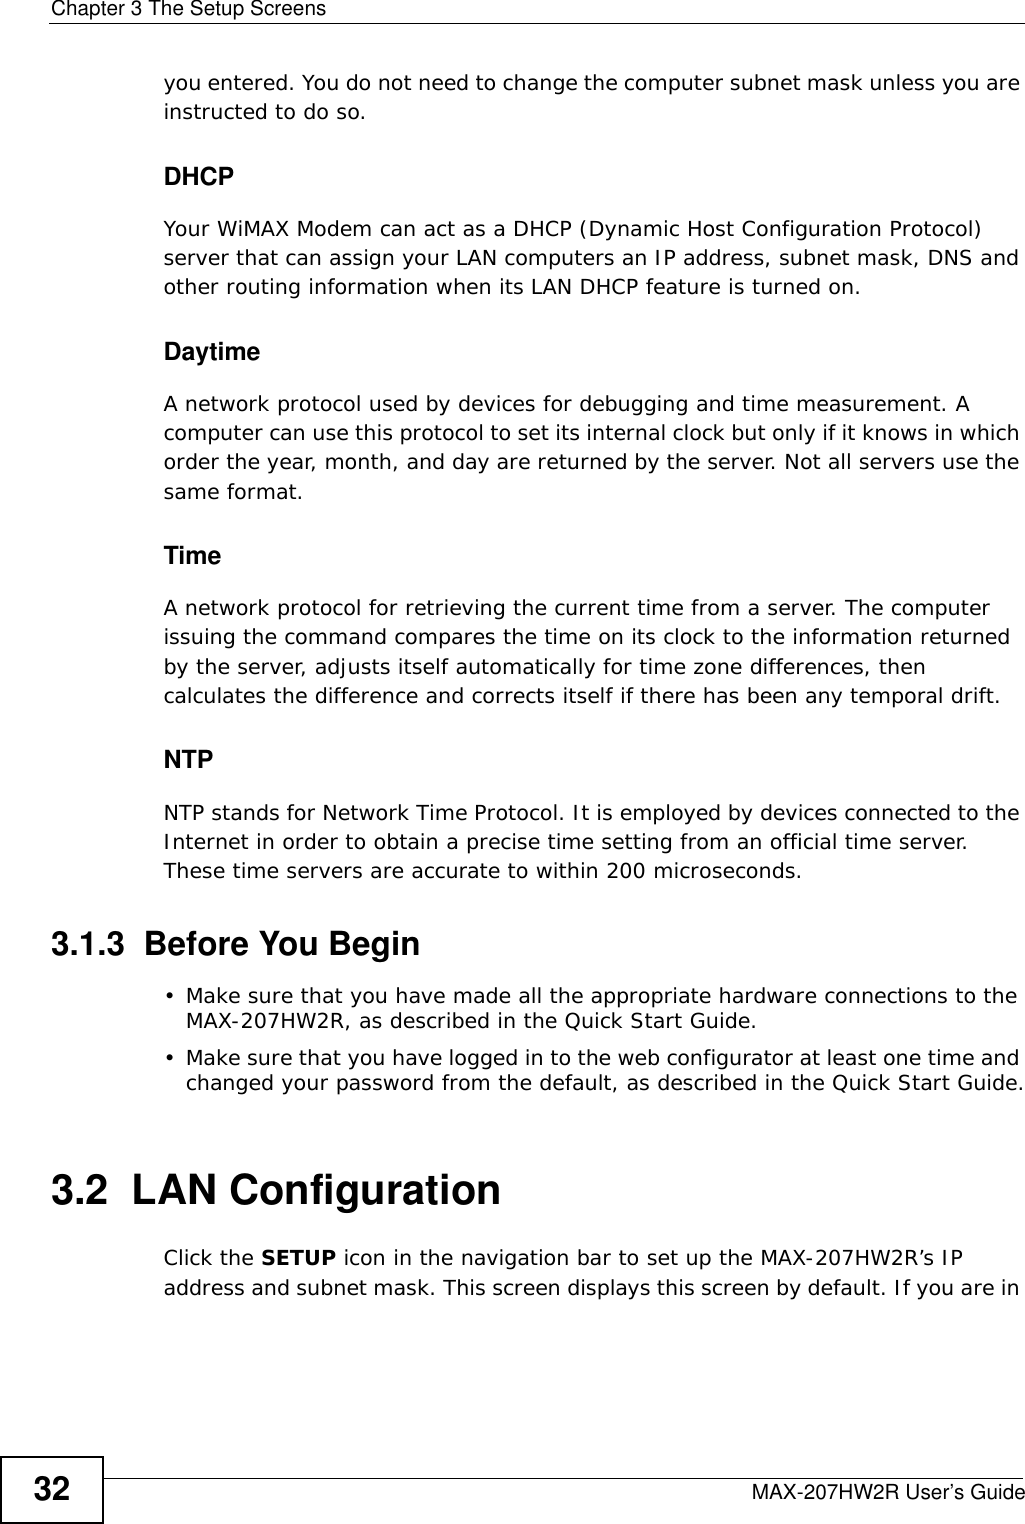 Chapter 3 The Setup ScreensMAX-207HW2R User’s Guide32you entered. You do not need to change the computer subnet mask unless you are instructed to do so.DHCPYour WiMAX Modem can act as a DHCP (Dynamic Host Configuration Protocol) server that can assign your LAN computers an IP address, subnet mask, DNS and other routing information when its LAN DHCP feature is turned on.DaytimeA network protocol used by devices for debugging and time measurement. A computer can use this protocol to set its internal clock but only if it knows in which order the year, month, and day are returned by the server. Not all servers use the same format.TimeA network protocol for retrieving the current time from a server. The computer issuing the command compares the time on its clock to the information returned by the server, adjusts itself automatically for time zone differences, then calculates the difference and corrects itself if there has been any temporal drift.NTPNTP stands for Network Time Protocol. It is employed by devices connected to the Internet in order to obtain a precise time setting from an official time server. These time servers are accurate to within 200 microseconds.3.1.3  Before You Begin• Make sure that you have made all the appropriate hardware connections to the MAX-207HW2R, as described in the Quick Start Guide.• Make sure that you have logged in to the web configurator at least one time and changed your password from the default, as described in the Quick Start Guide.3.2  LAN ConfigurationClick the SETUP icon in the navigation bar to set up the MAX-207HW2R’s IP address and subnet mask. This screen displays this screen by default. If you are in 